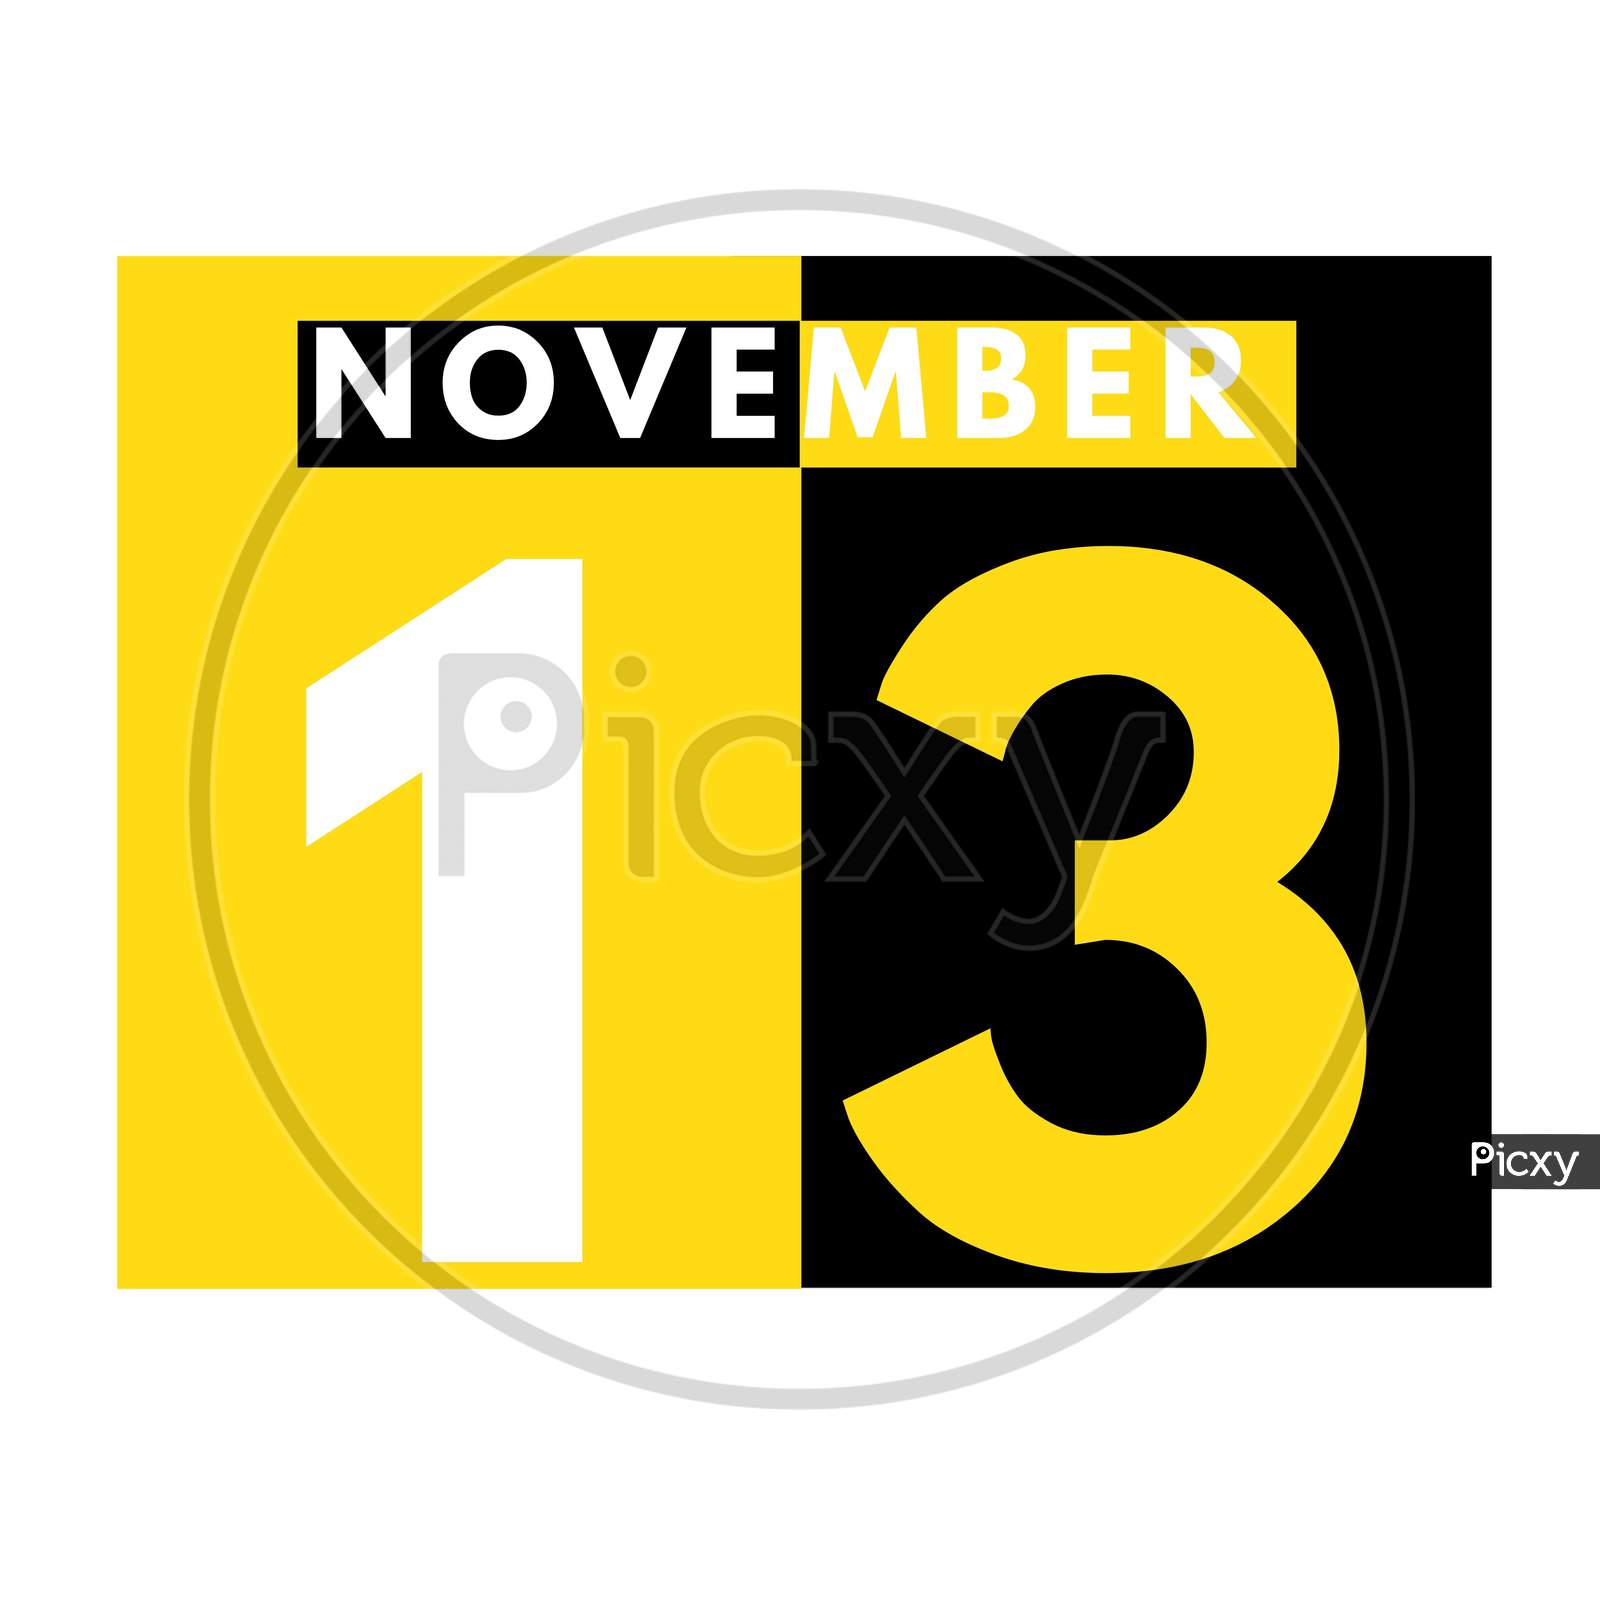 November 13 . Modern Daily Calendar Icon .Date ,Day, Month .Calendar For The Month Of November